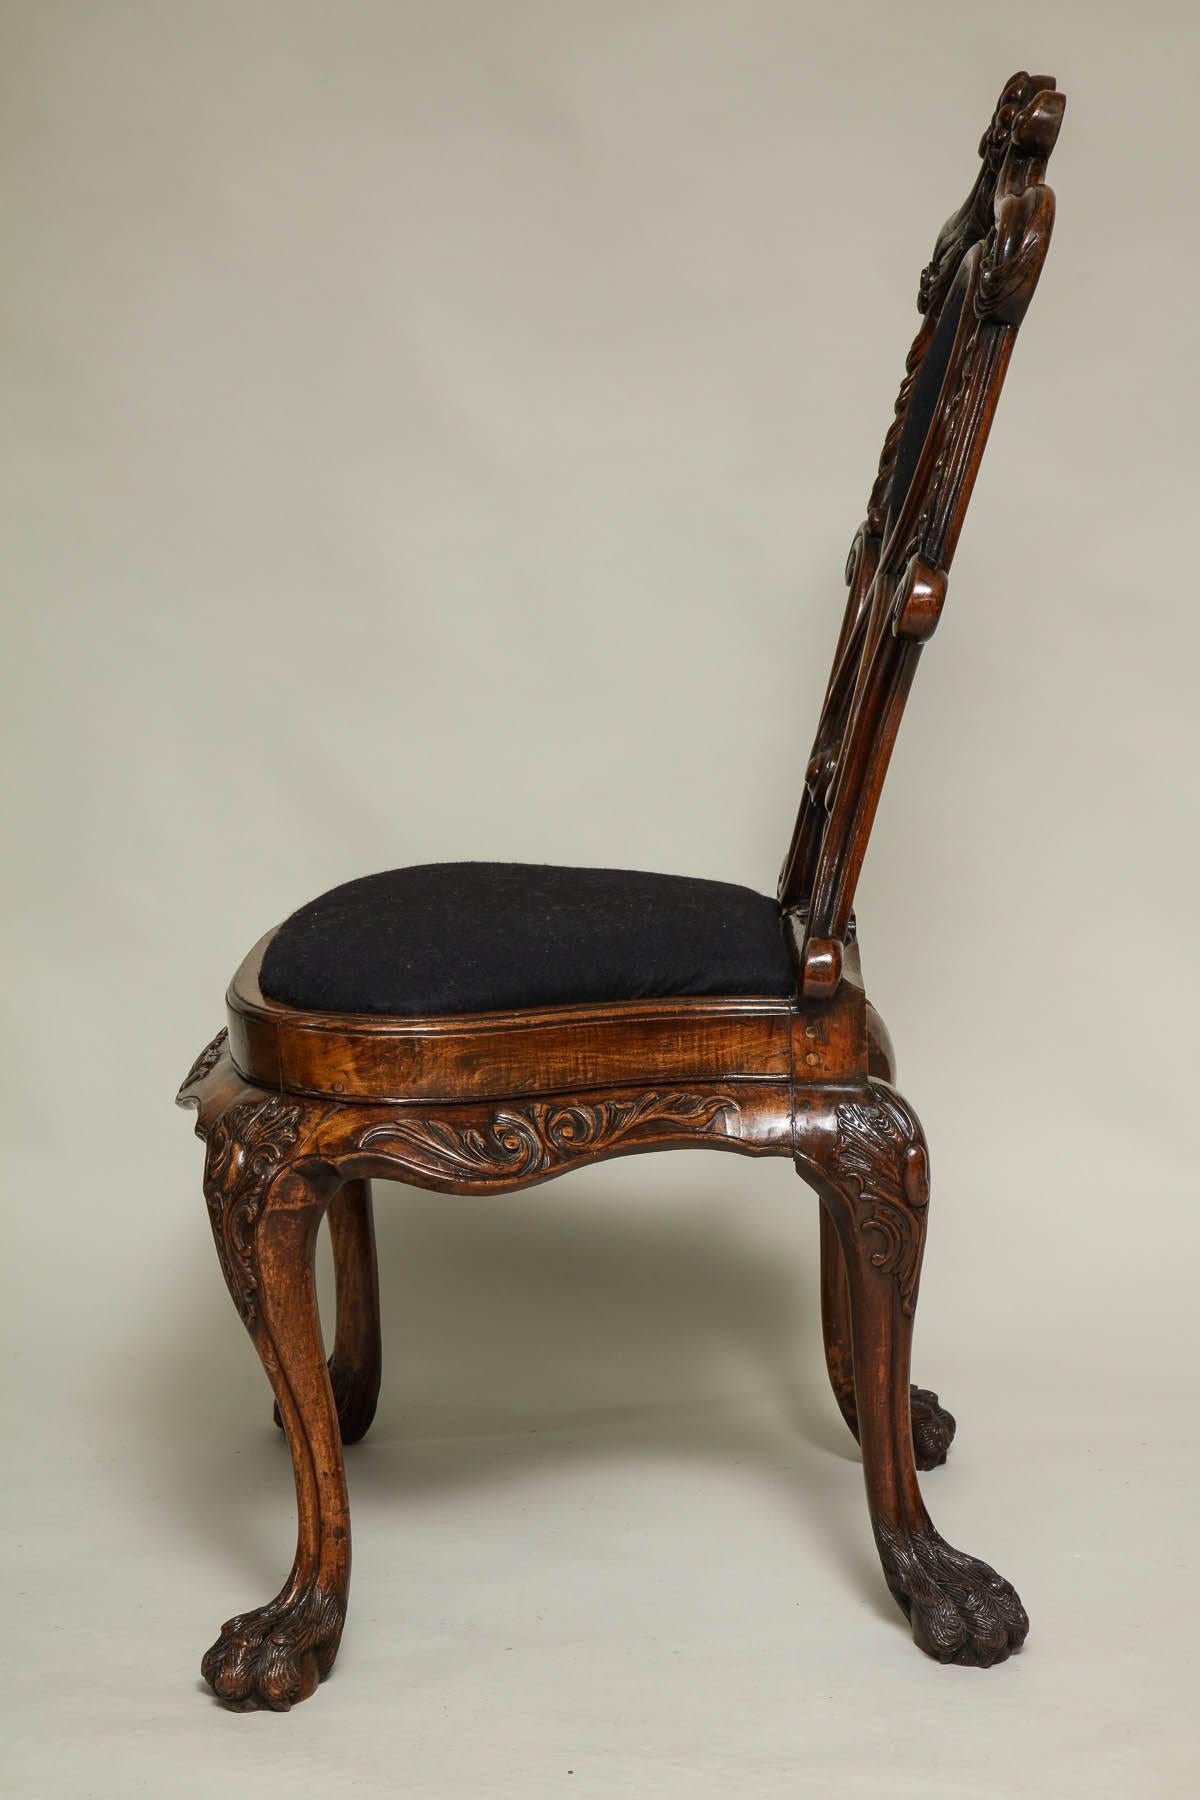 Rosewood Important 18th Century Portuguese Chair For Sale